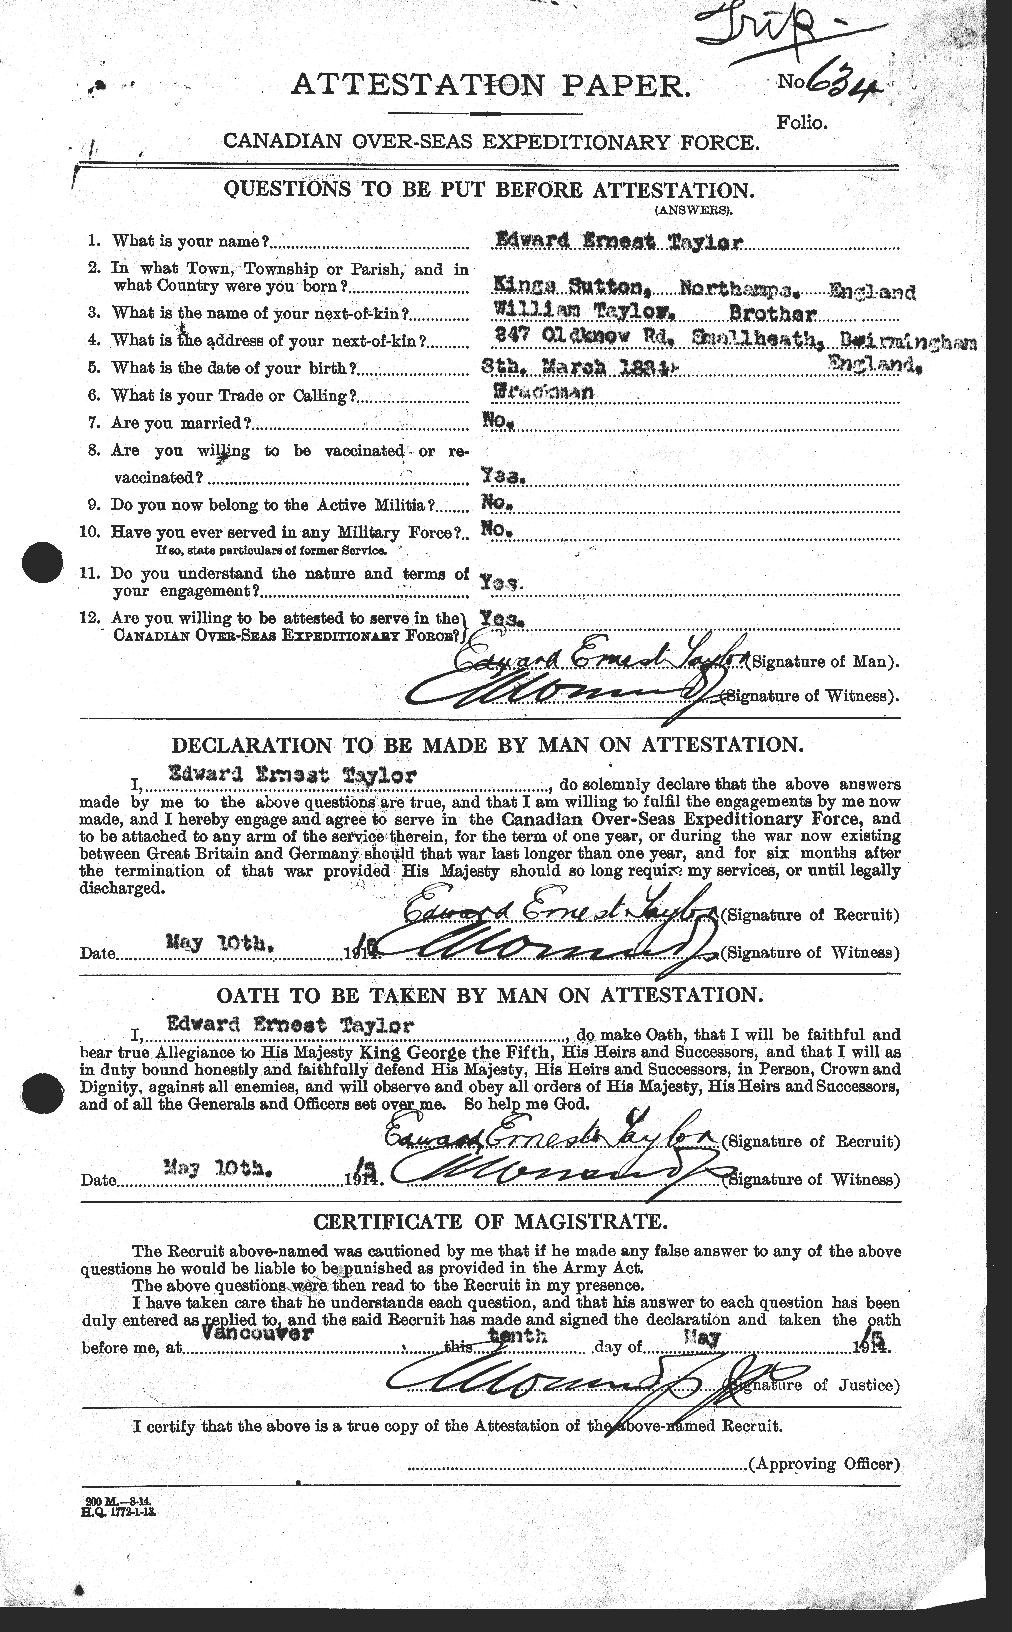 Personnel Records of the First World War - CEF 627307a